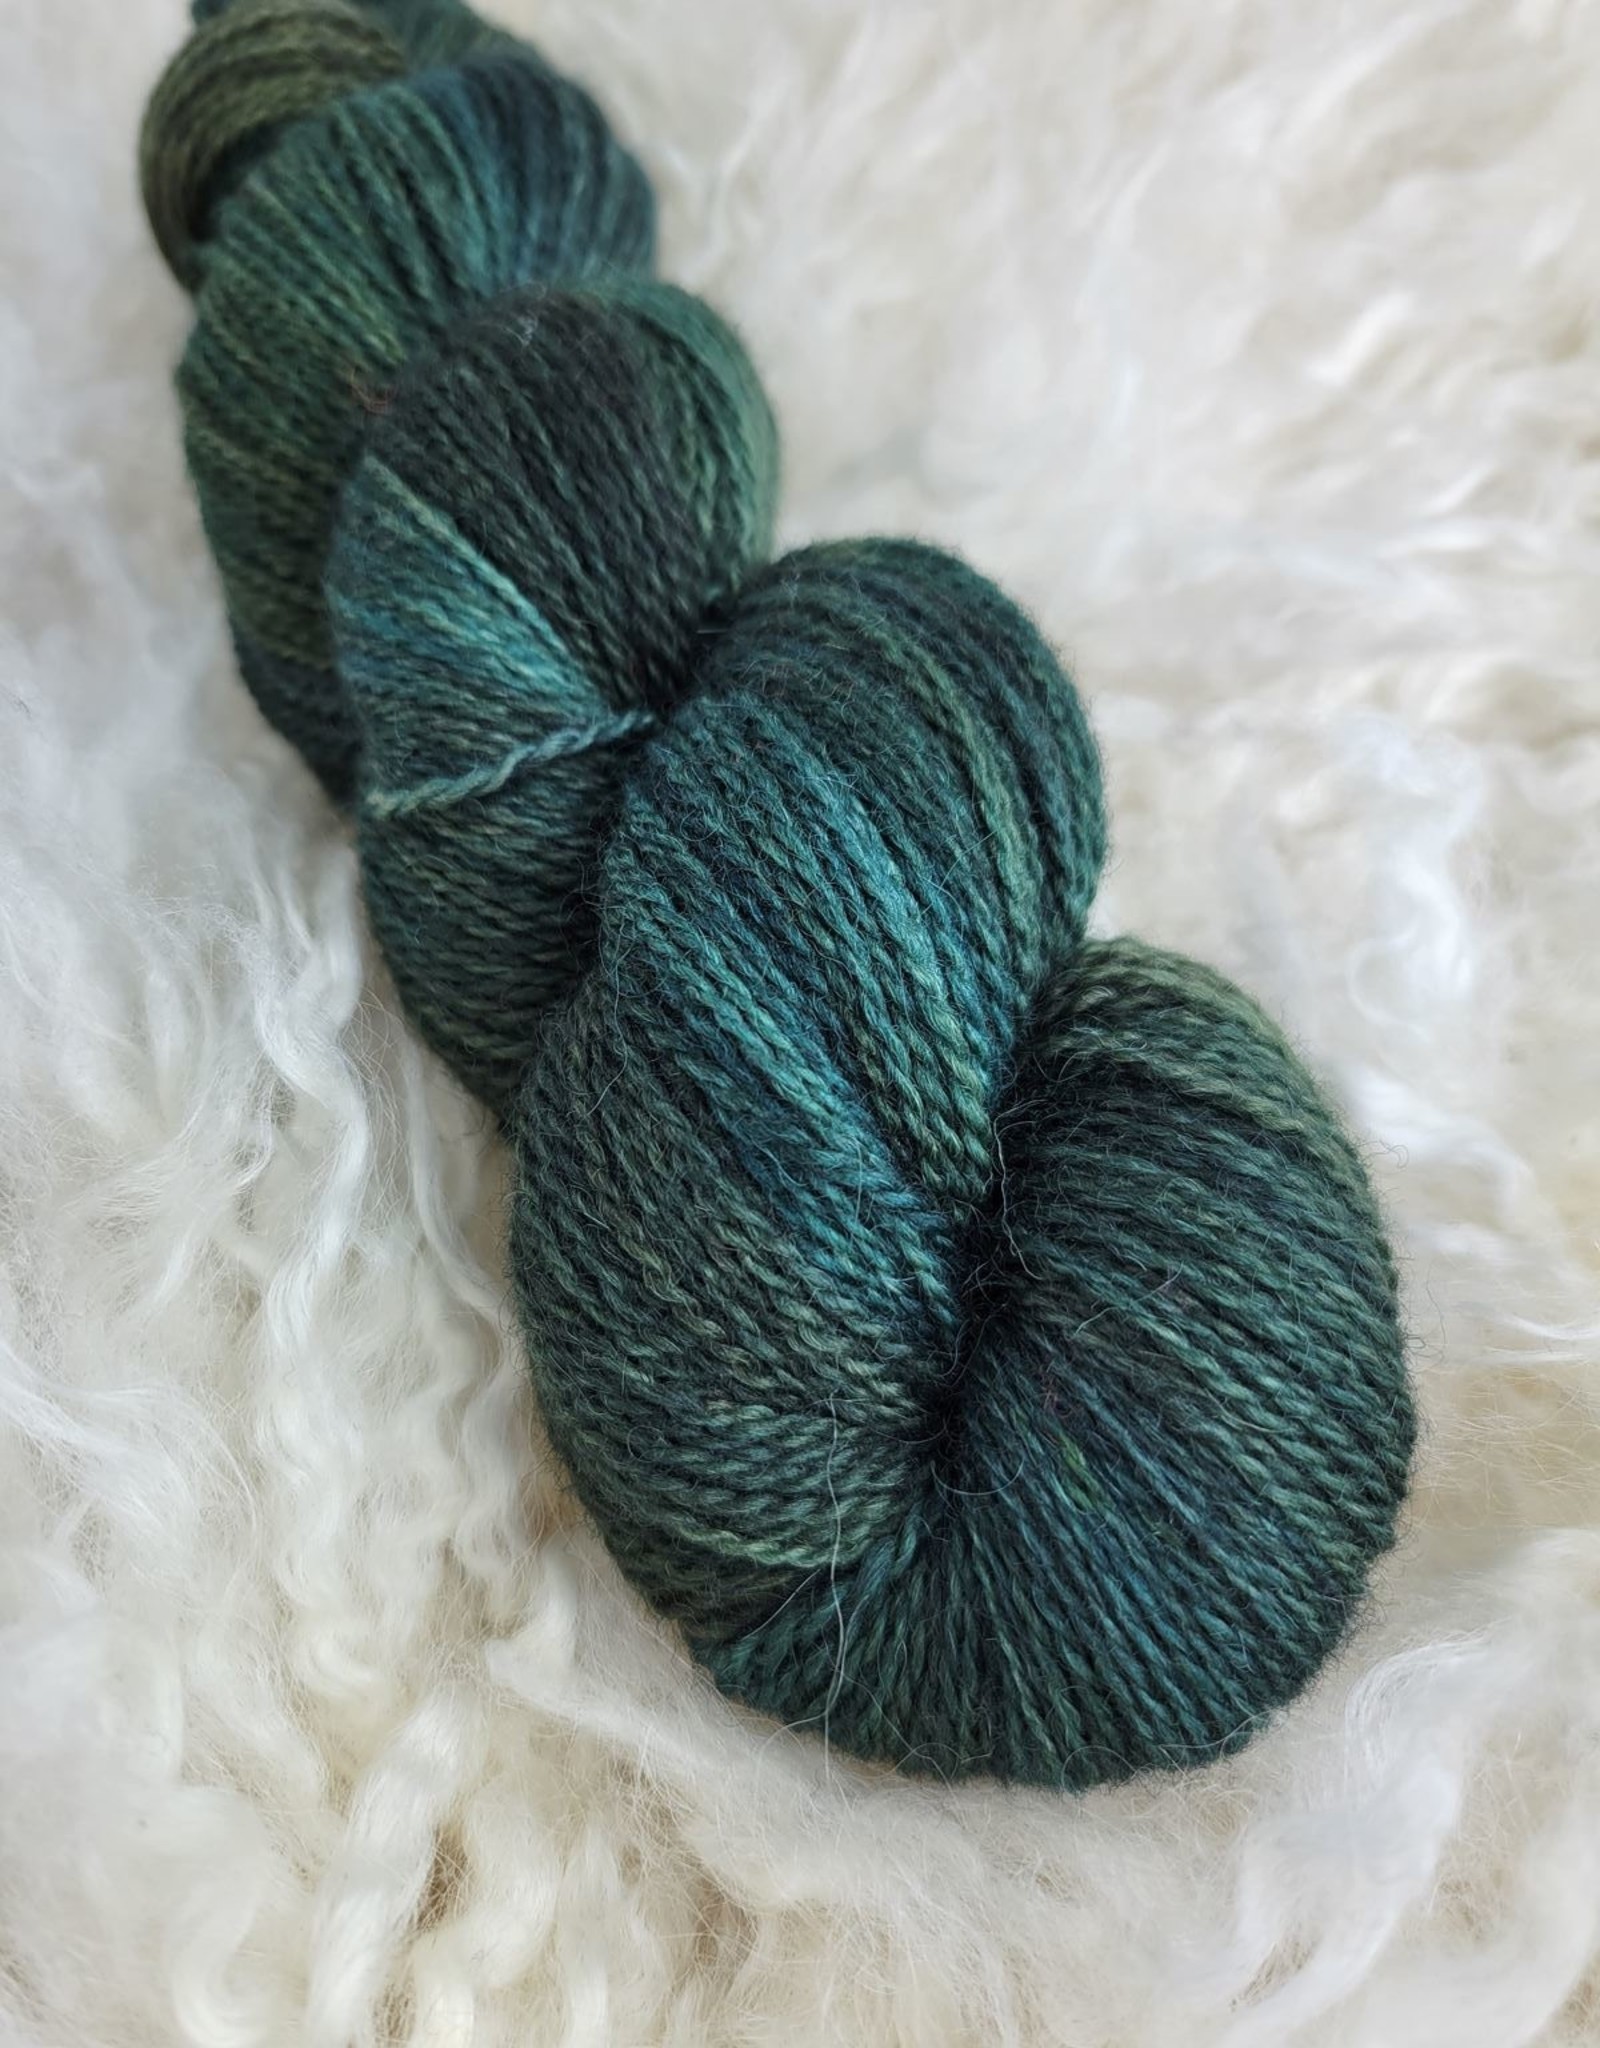 Palouse Yarn Co Moorland Sport 100g boreal forest